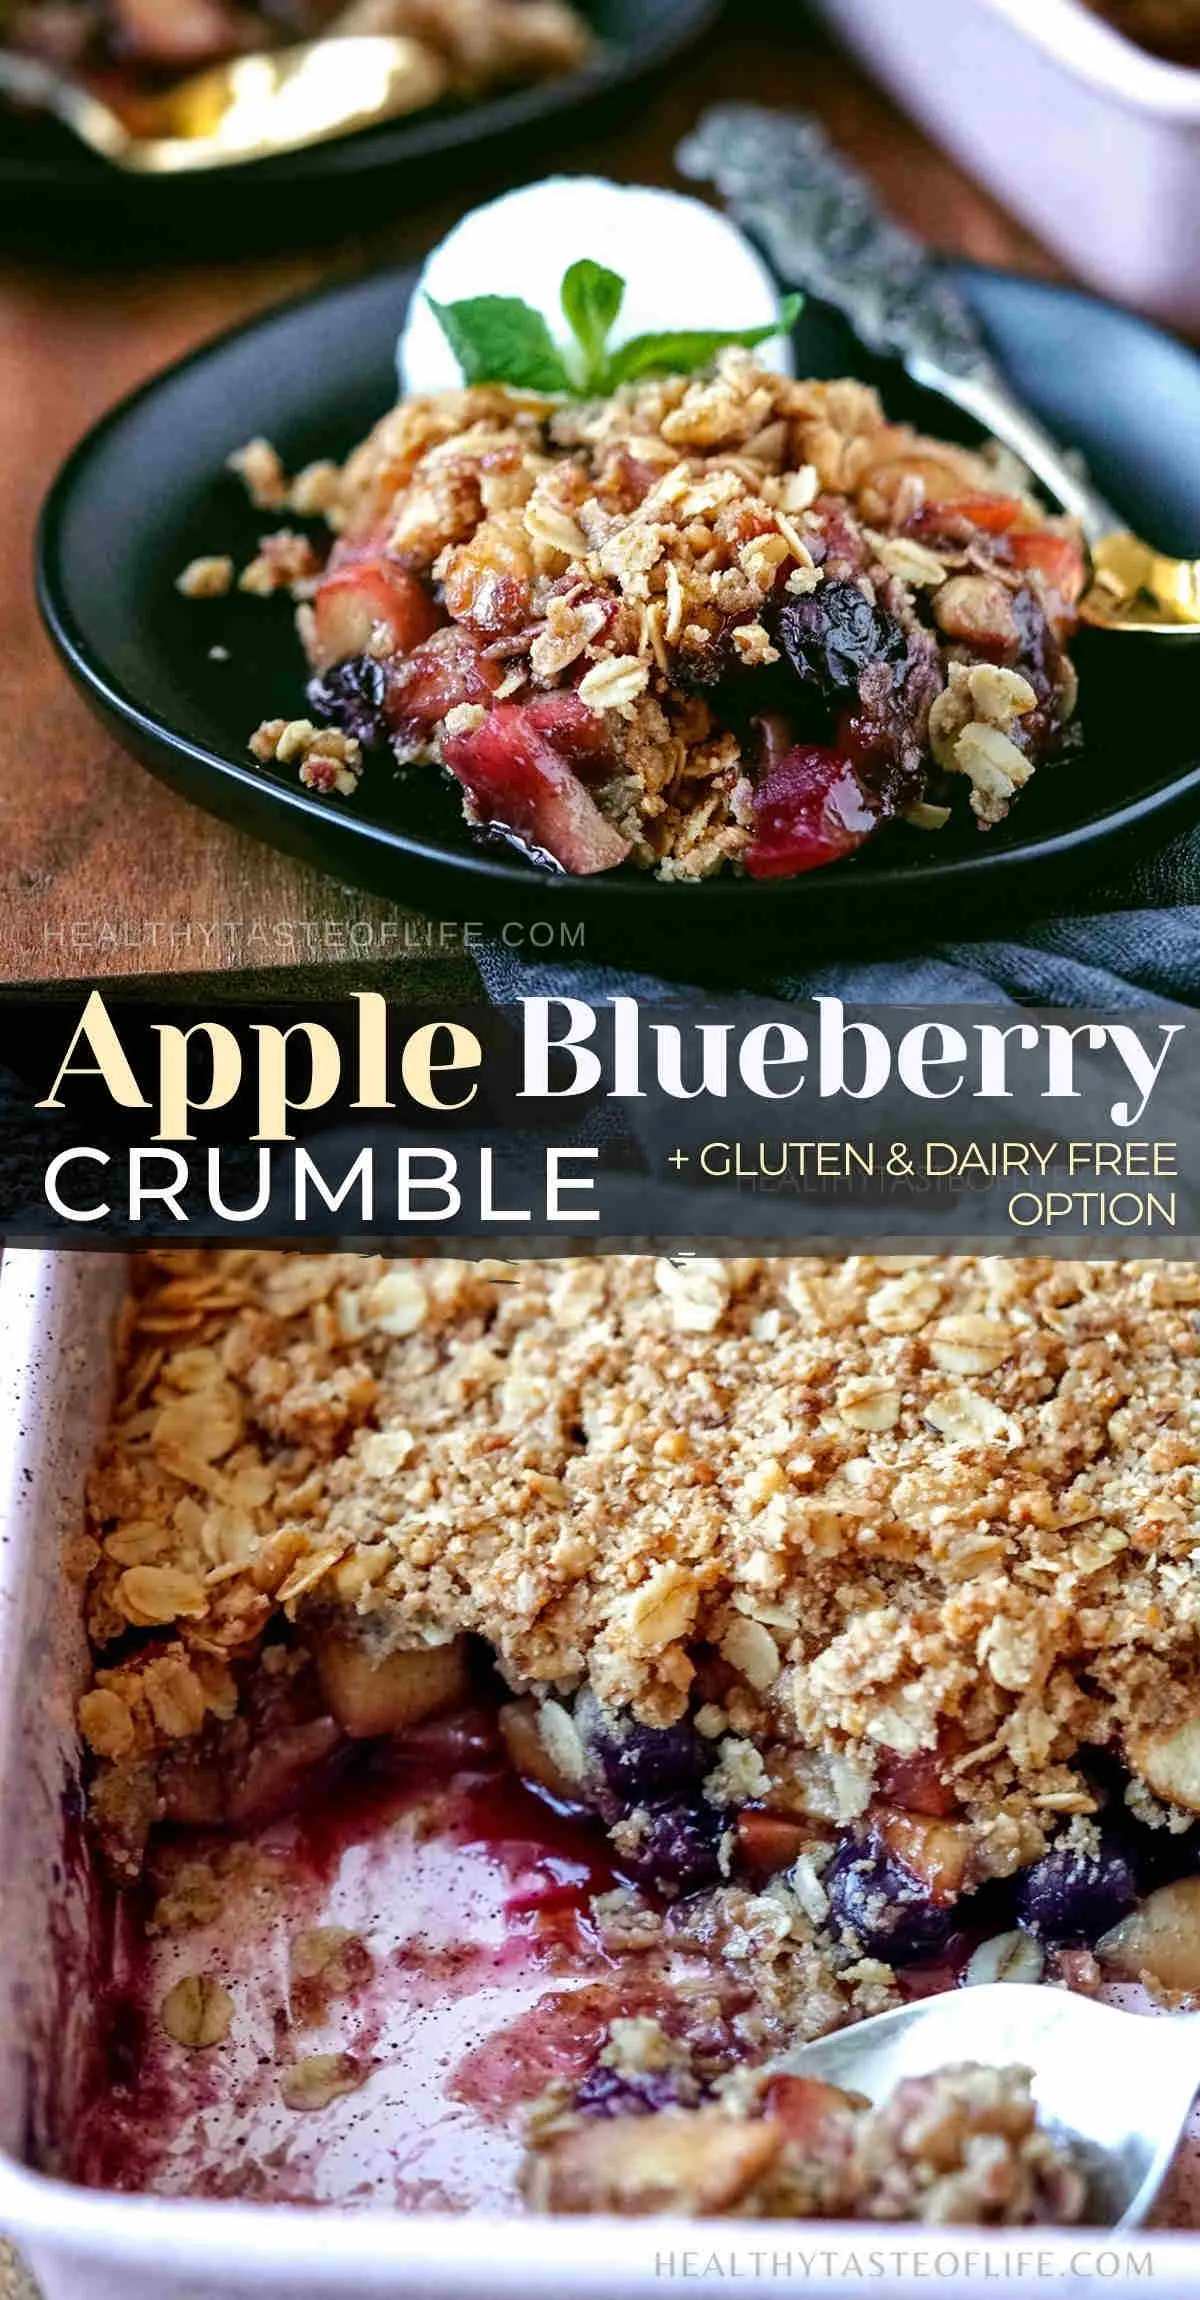 This easy apple and blueberry crumble recipe has baked sweet juicy apples and blueberry filling covered with a crisp oat crumble topping. Call it a crumble or a crisp, this apple blueberry crumble is an easy fall/winter dessert that everybody loves! This blueberry and apple crumble is delicious as is, served warm or with a scoop of ice cream. For healthy apple and blueberry crisp crumble check out the gluten and dairy free versions! #appleblueberrycrumble #appleberrycrumble #appleblueberrycrisp